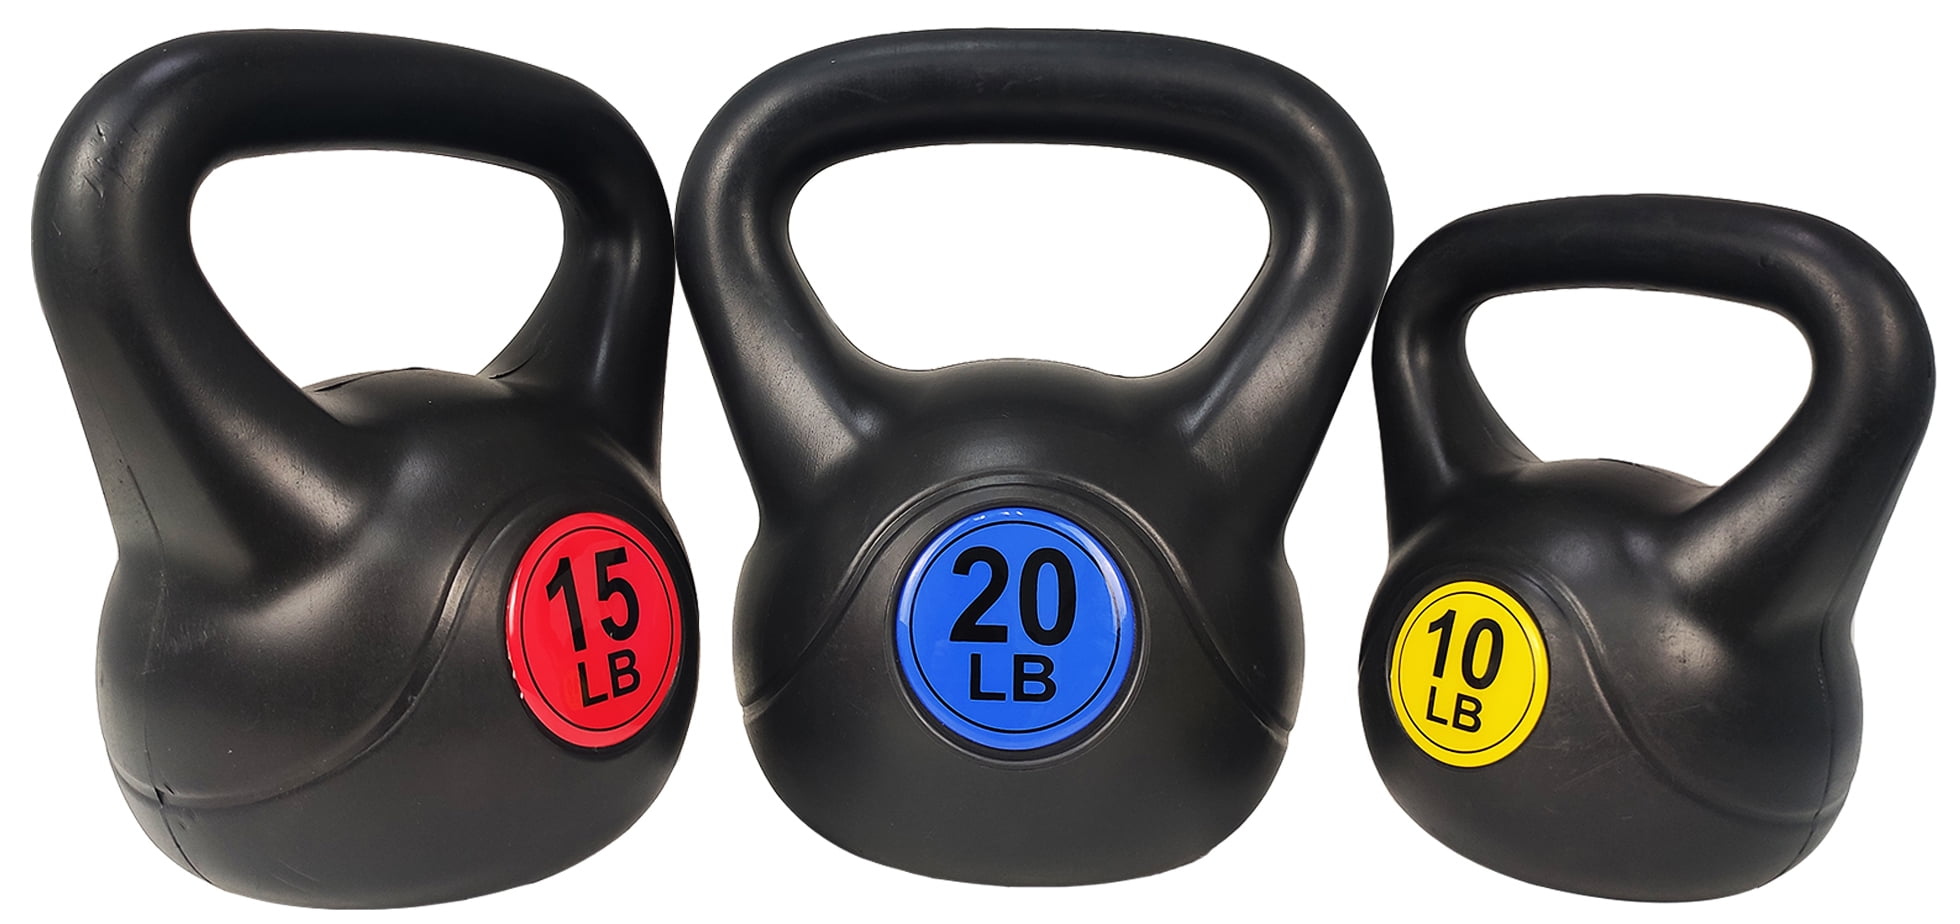 BalanceFrom Wide Grip 3-Piece Kettlebell Exercise Fitness Weight Set, Include 10 Lbs., 15 Lbs., 20 Lbs. - 45lbs